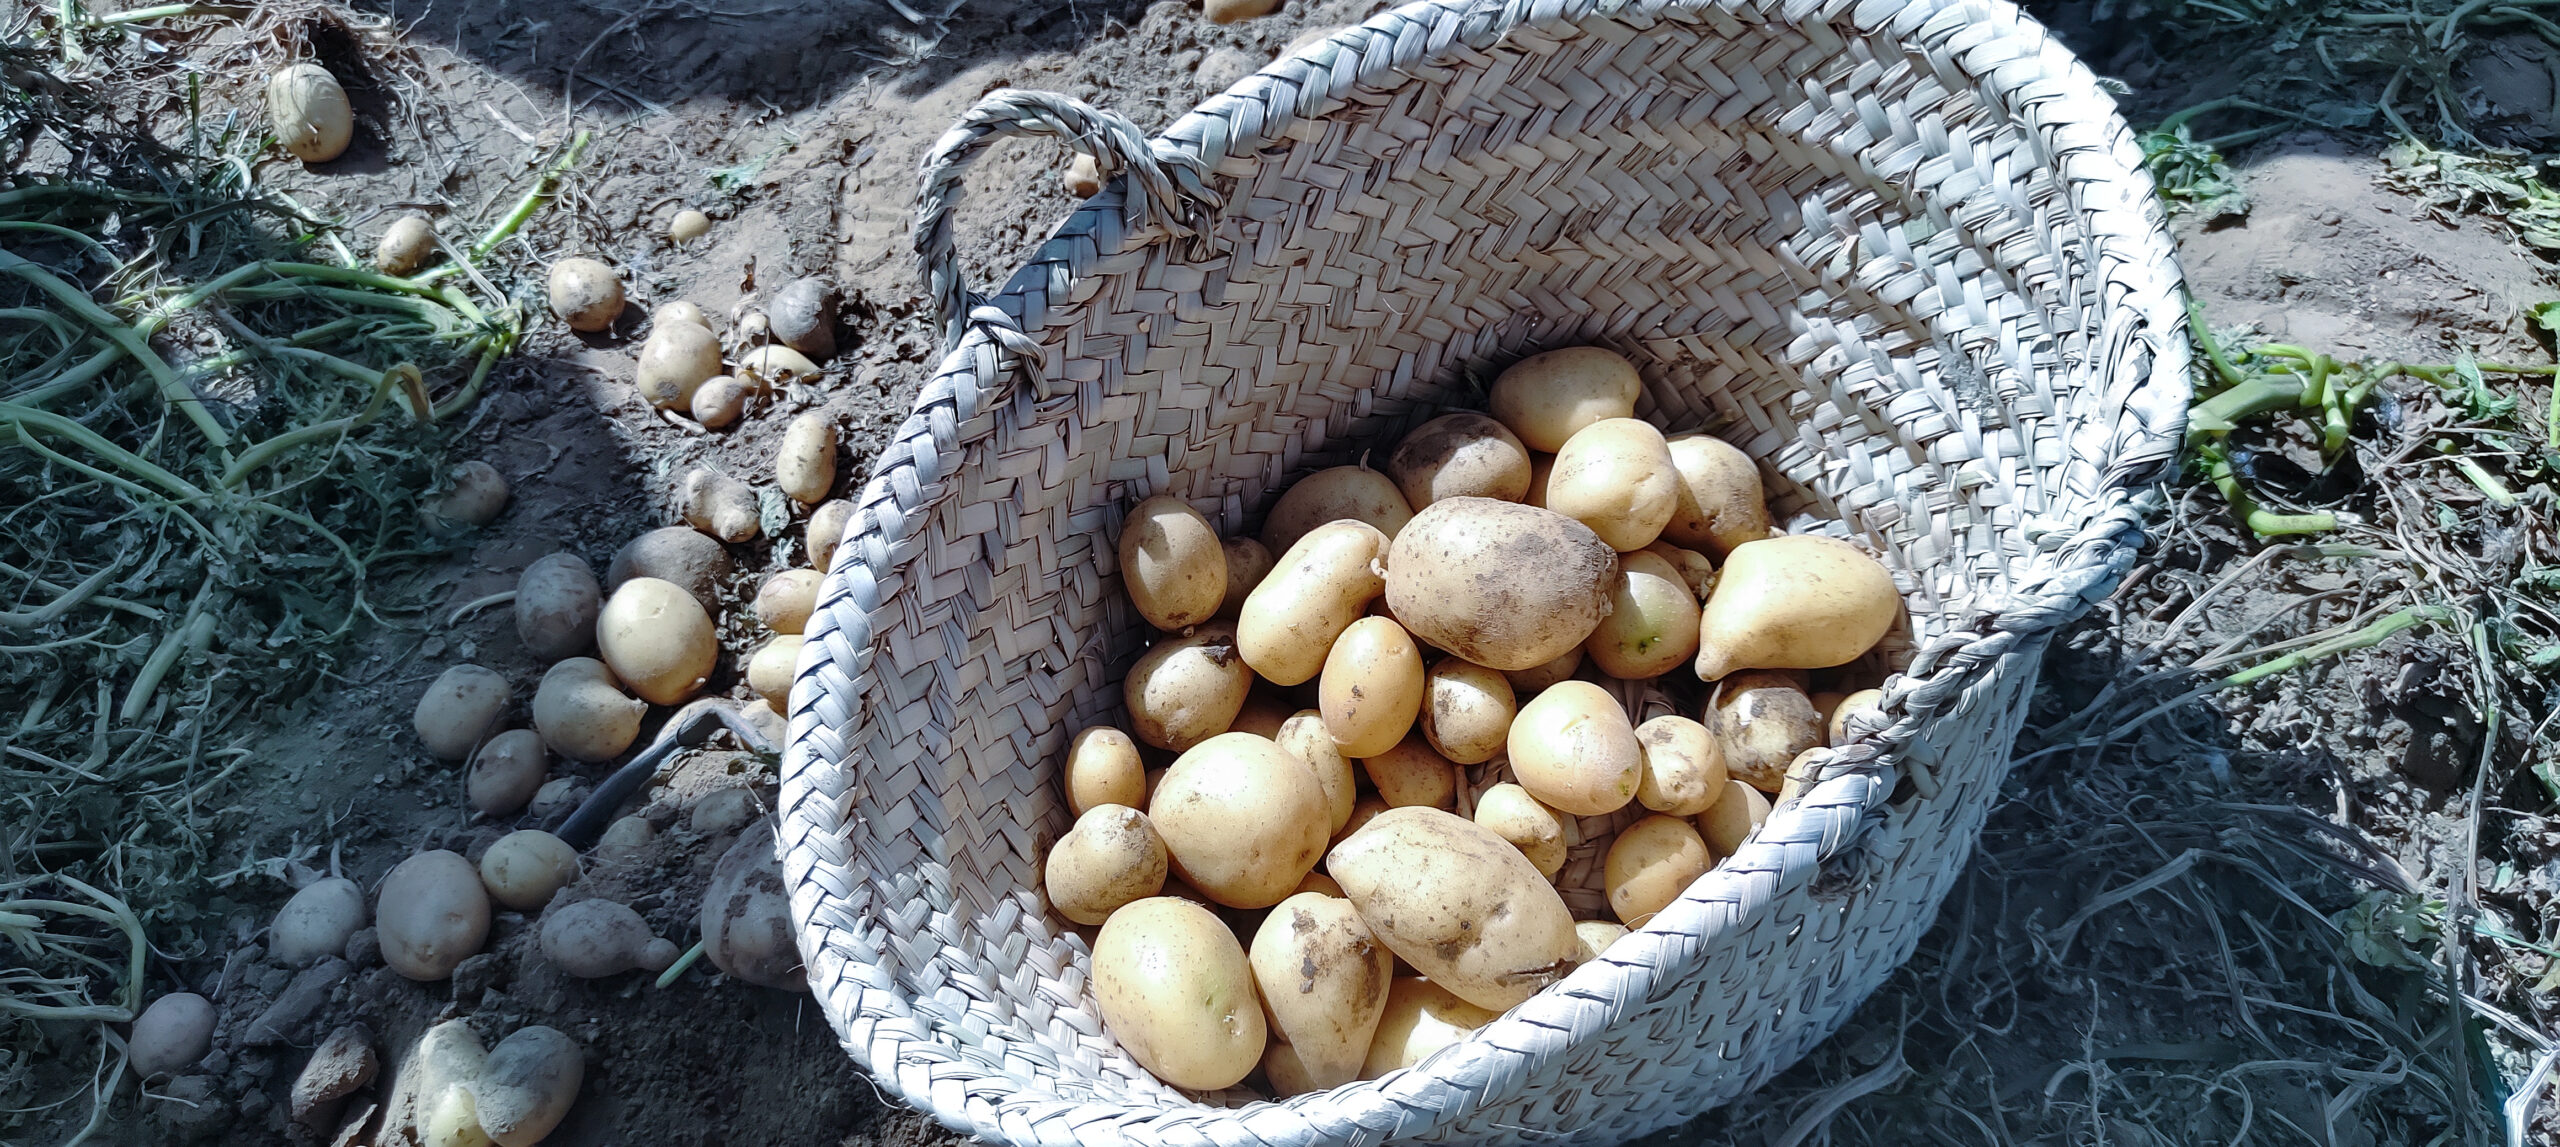 A woven basket filled with freshly harvested potatoes sits on the ground among scattered potatoes and plants.